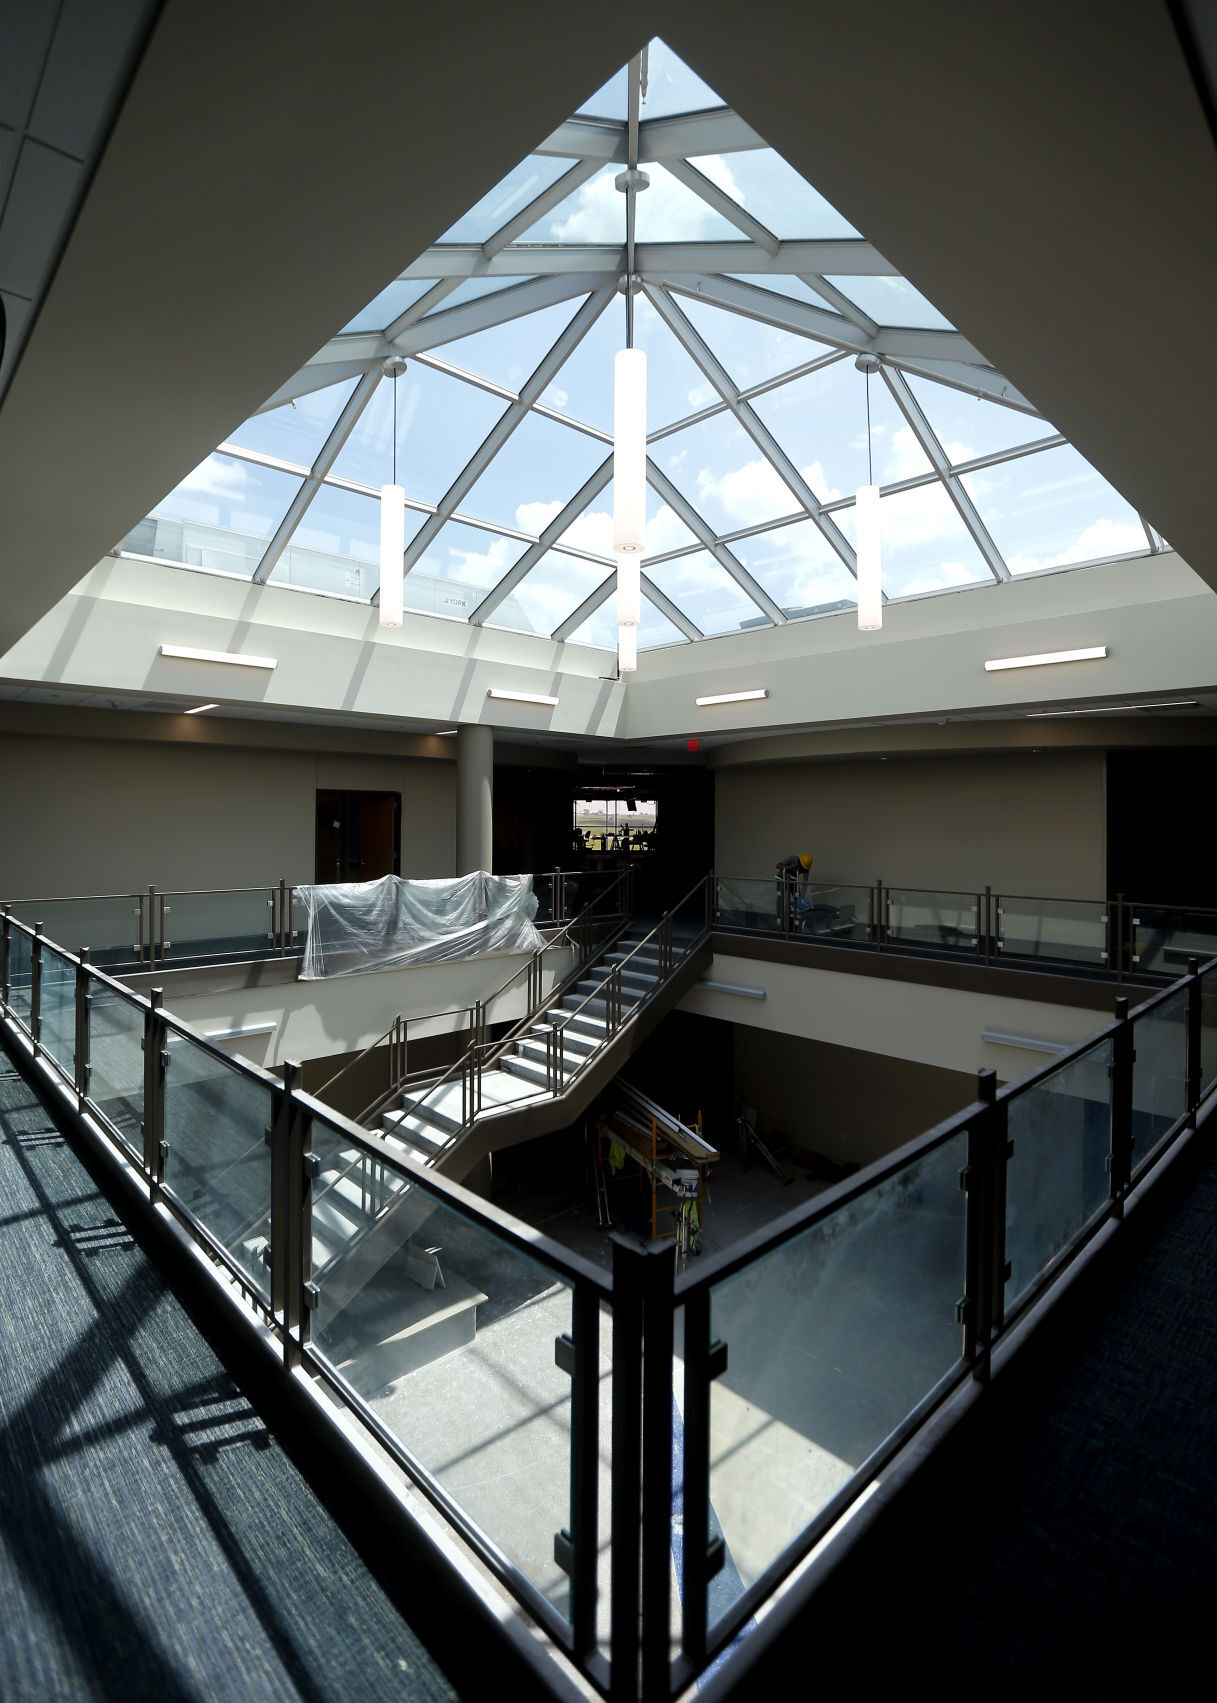 The newly added atrium area of Northeast Iowa Community College in Peosta, Iowa, on Thursday.    PHOTO CREDIT: Dave Kettering